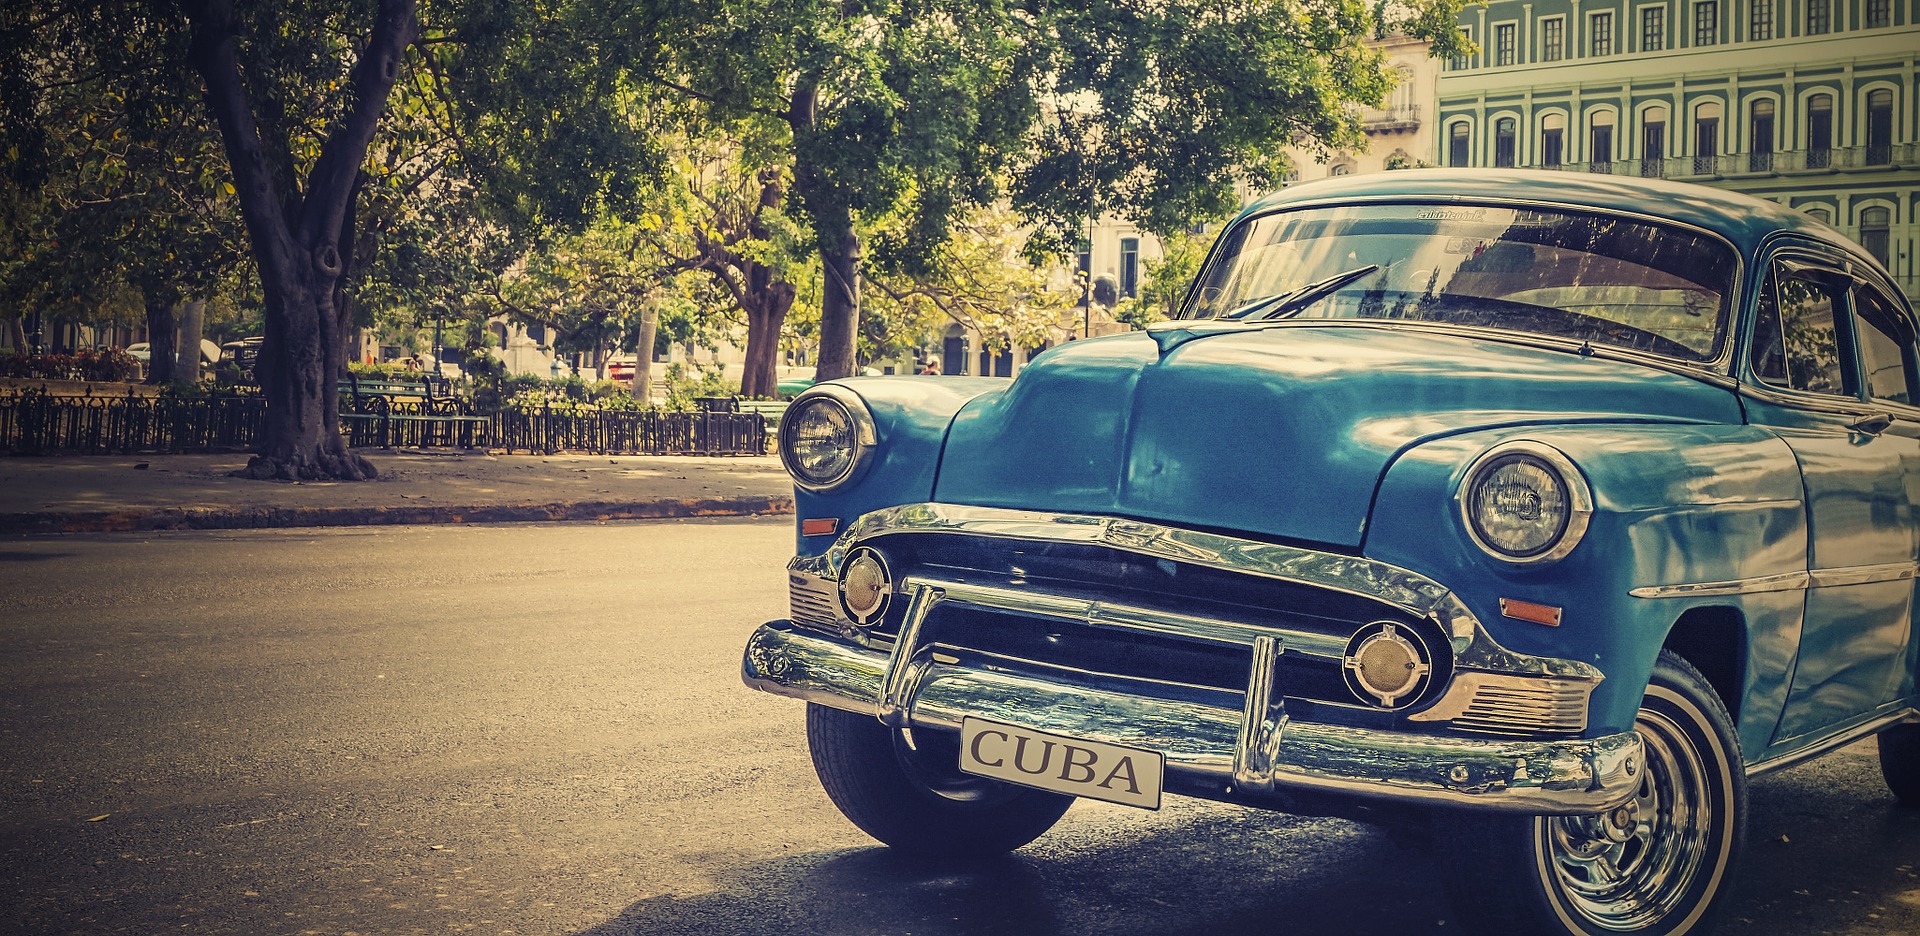 What To Do When In Havana